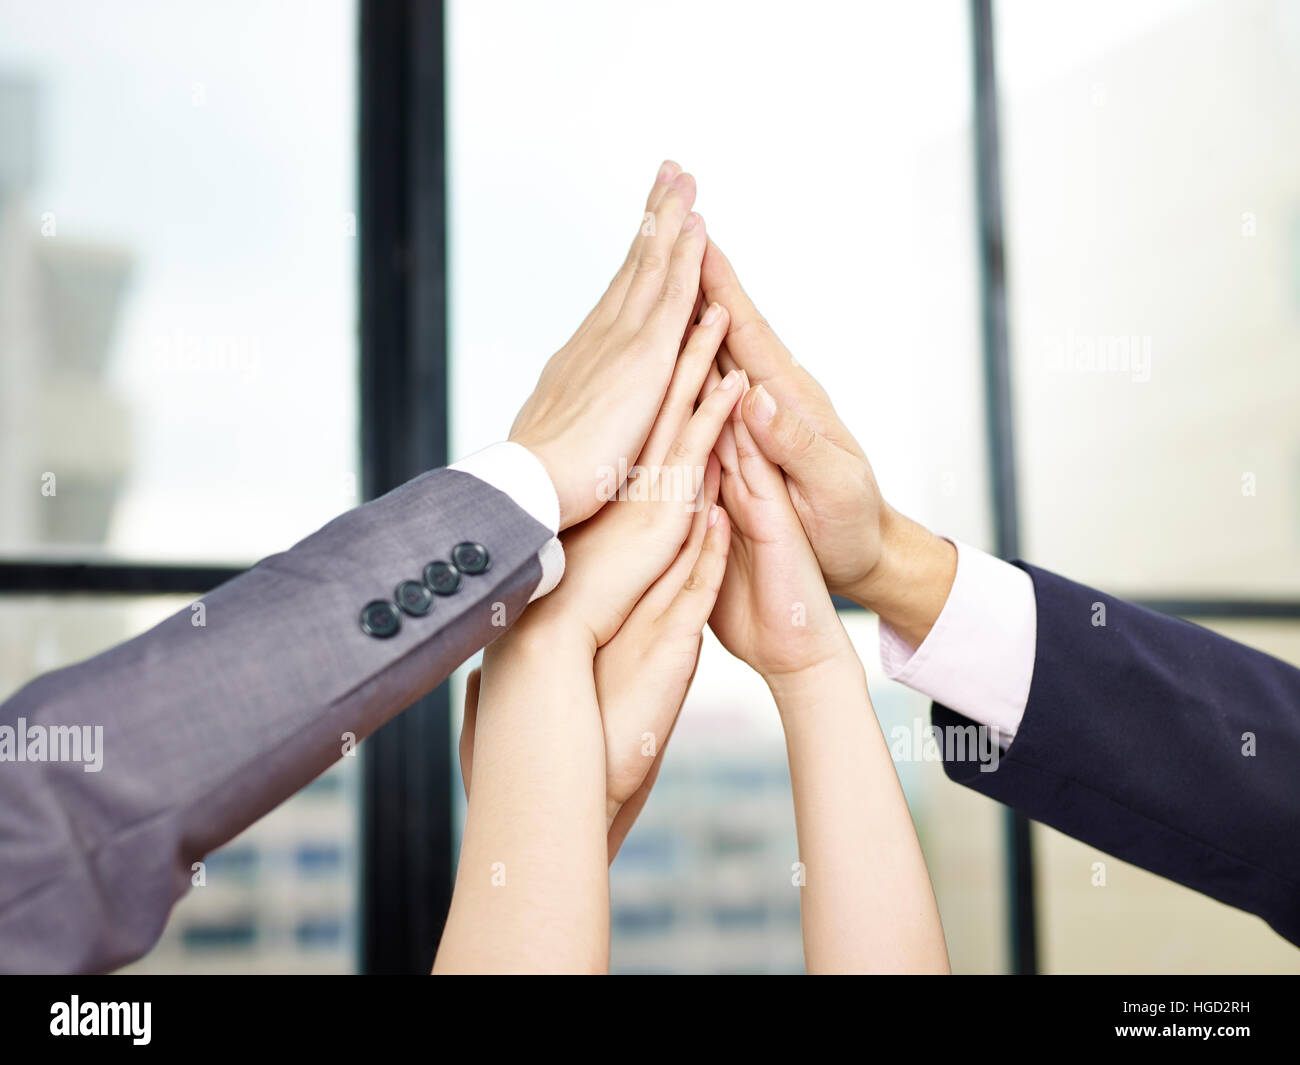 business people putting hands together to form a pyramid to show determination or teamwork spirit. Stock Photo